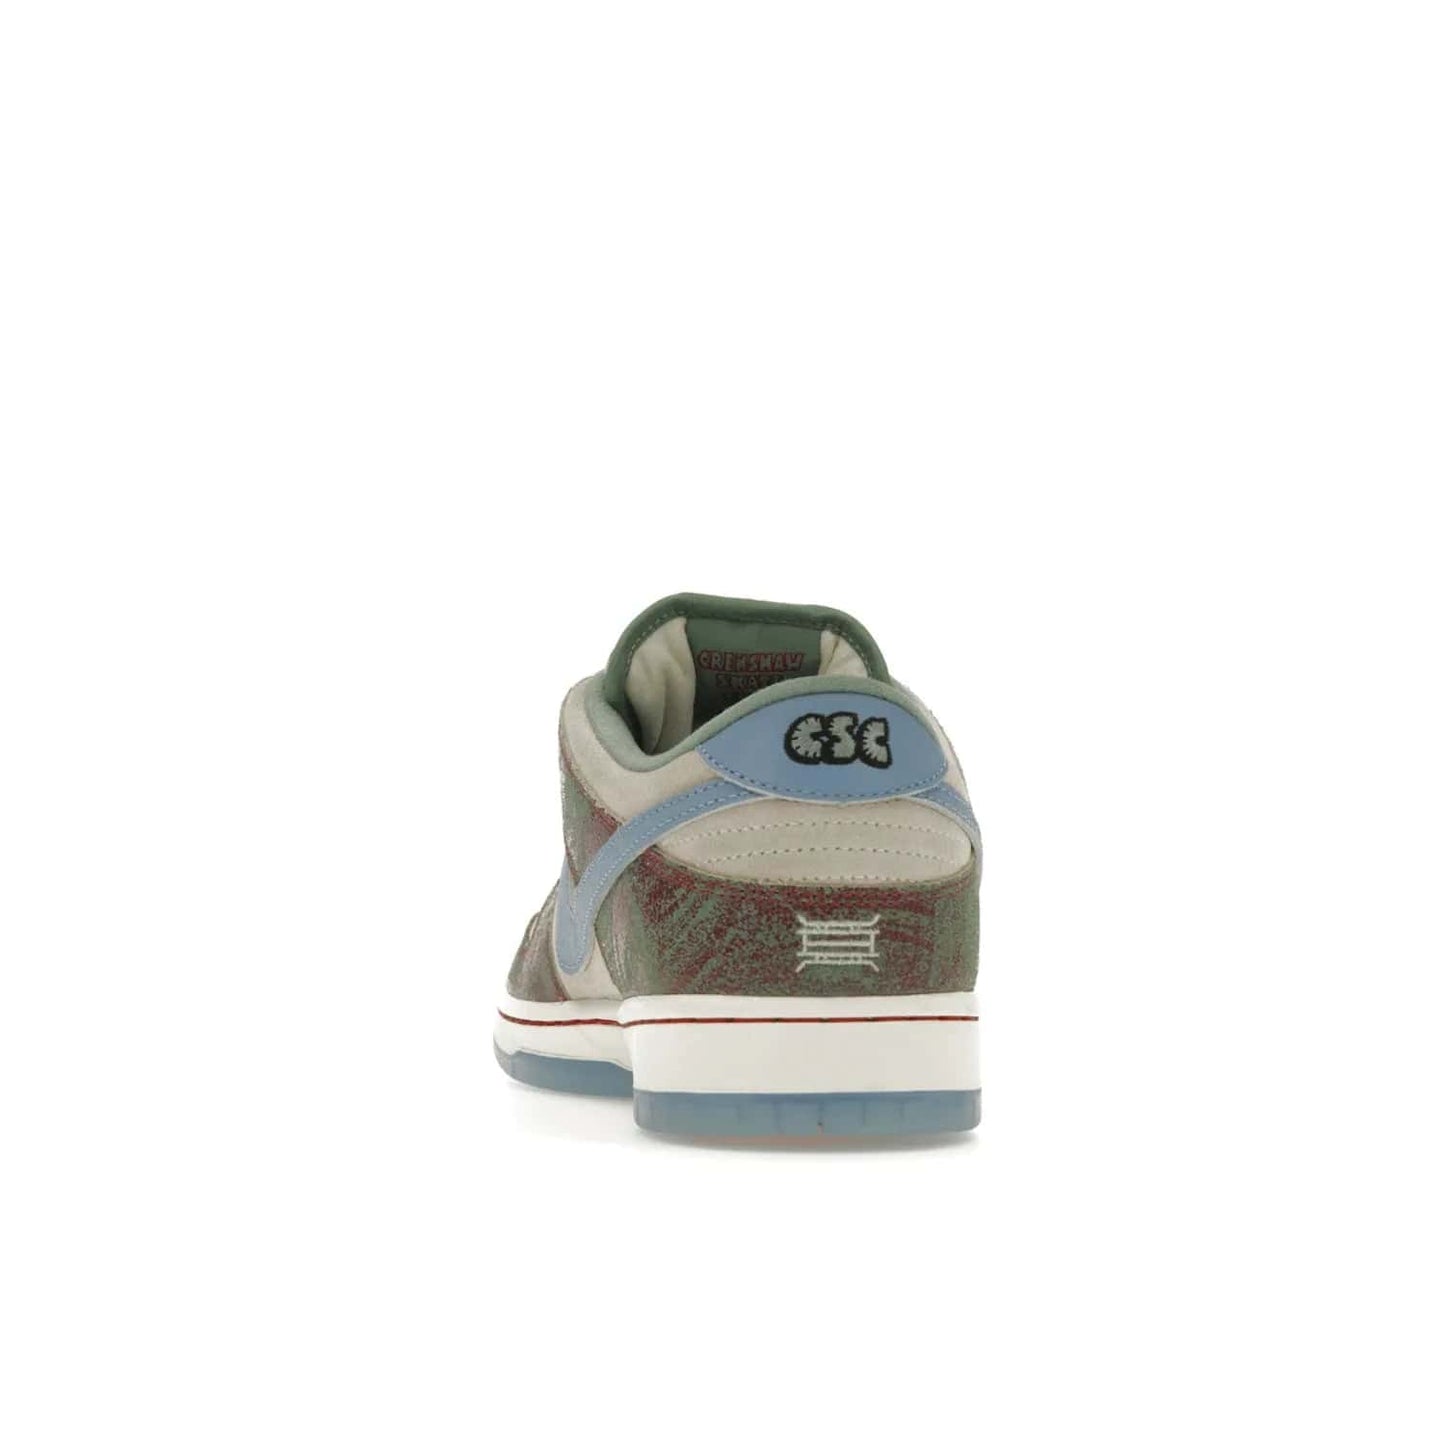 Nike SB Dunk Low Crenshaw Skate Club - Image 27 - Only at www.BallersClubKickz.com - Introducing the Nike SB Dunk Low Crenshaw Skate Club! Classic skate shoes with Sail and Light Blue upper, Cedar accents, padded collars and superior grip for comfortable, stable performance and style. Ideal for any skate session.